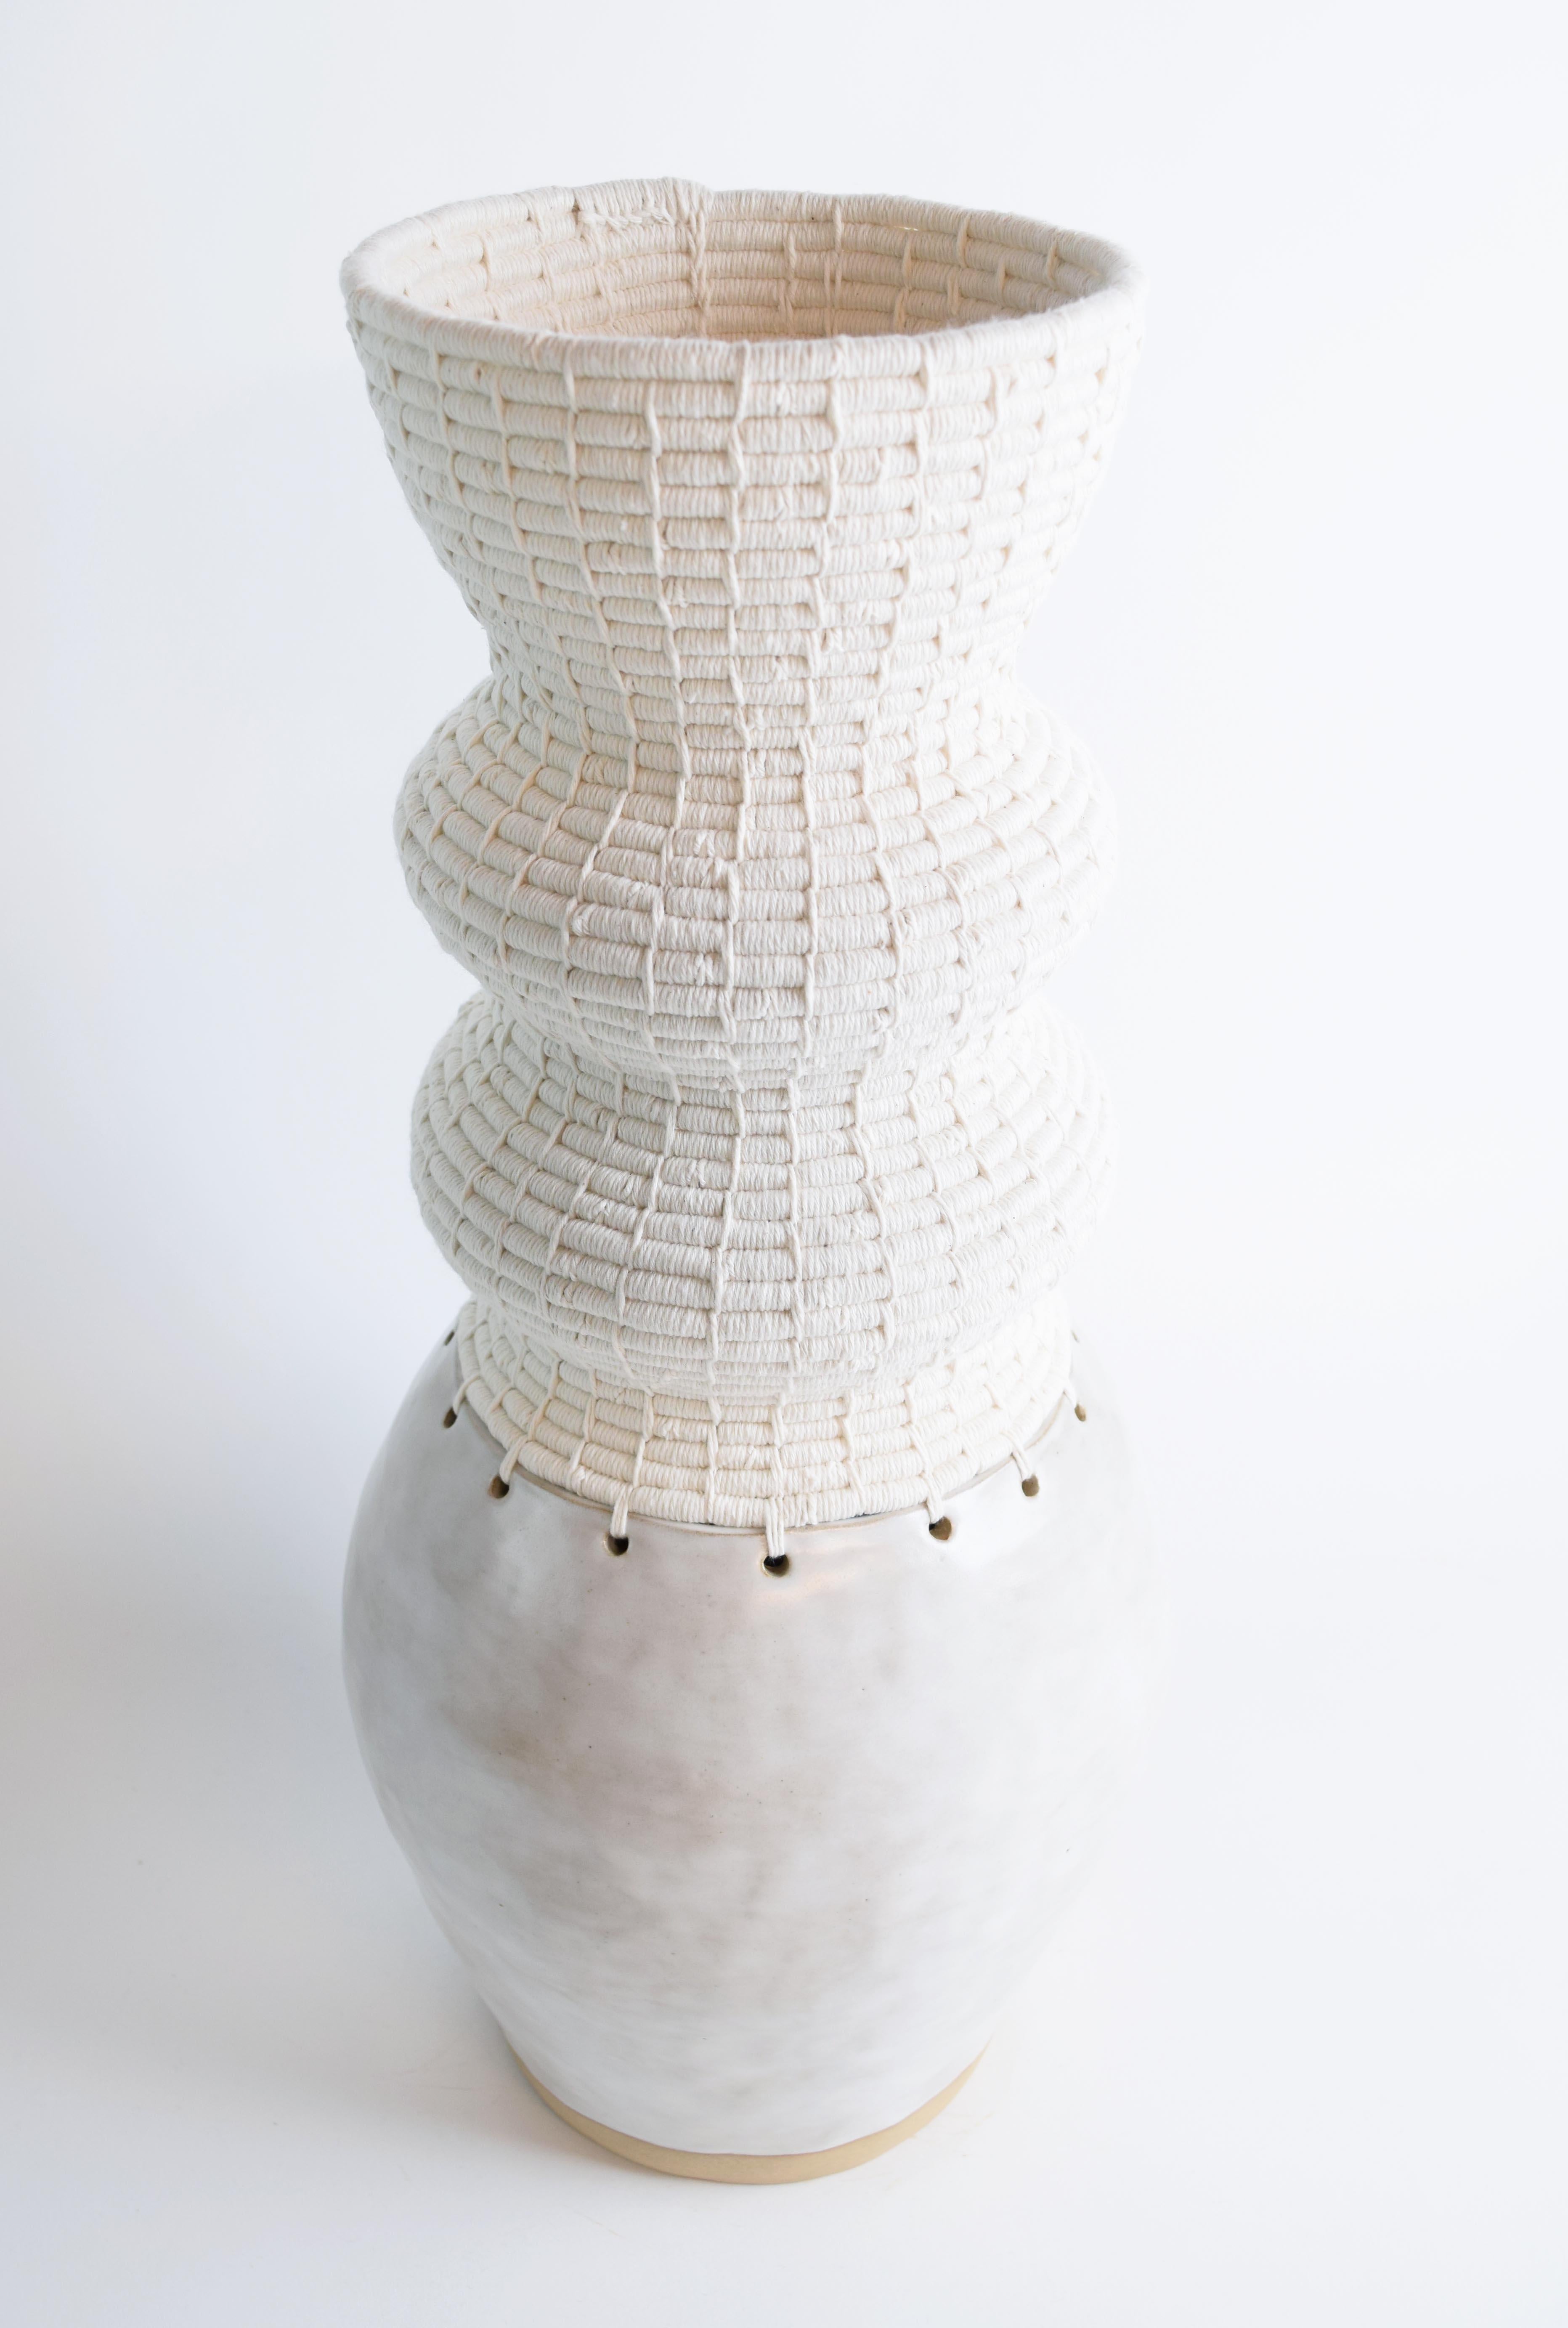 Vessel #813 by Karen Gayle Tinney

Hand formed stoneware base with satin white glaze. The top part is woven in white cotton.

20”H x 8”W

One of a kind collections with a limited number of pieces are released periodically throughout the year. Each